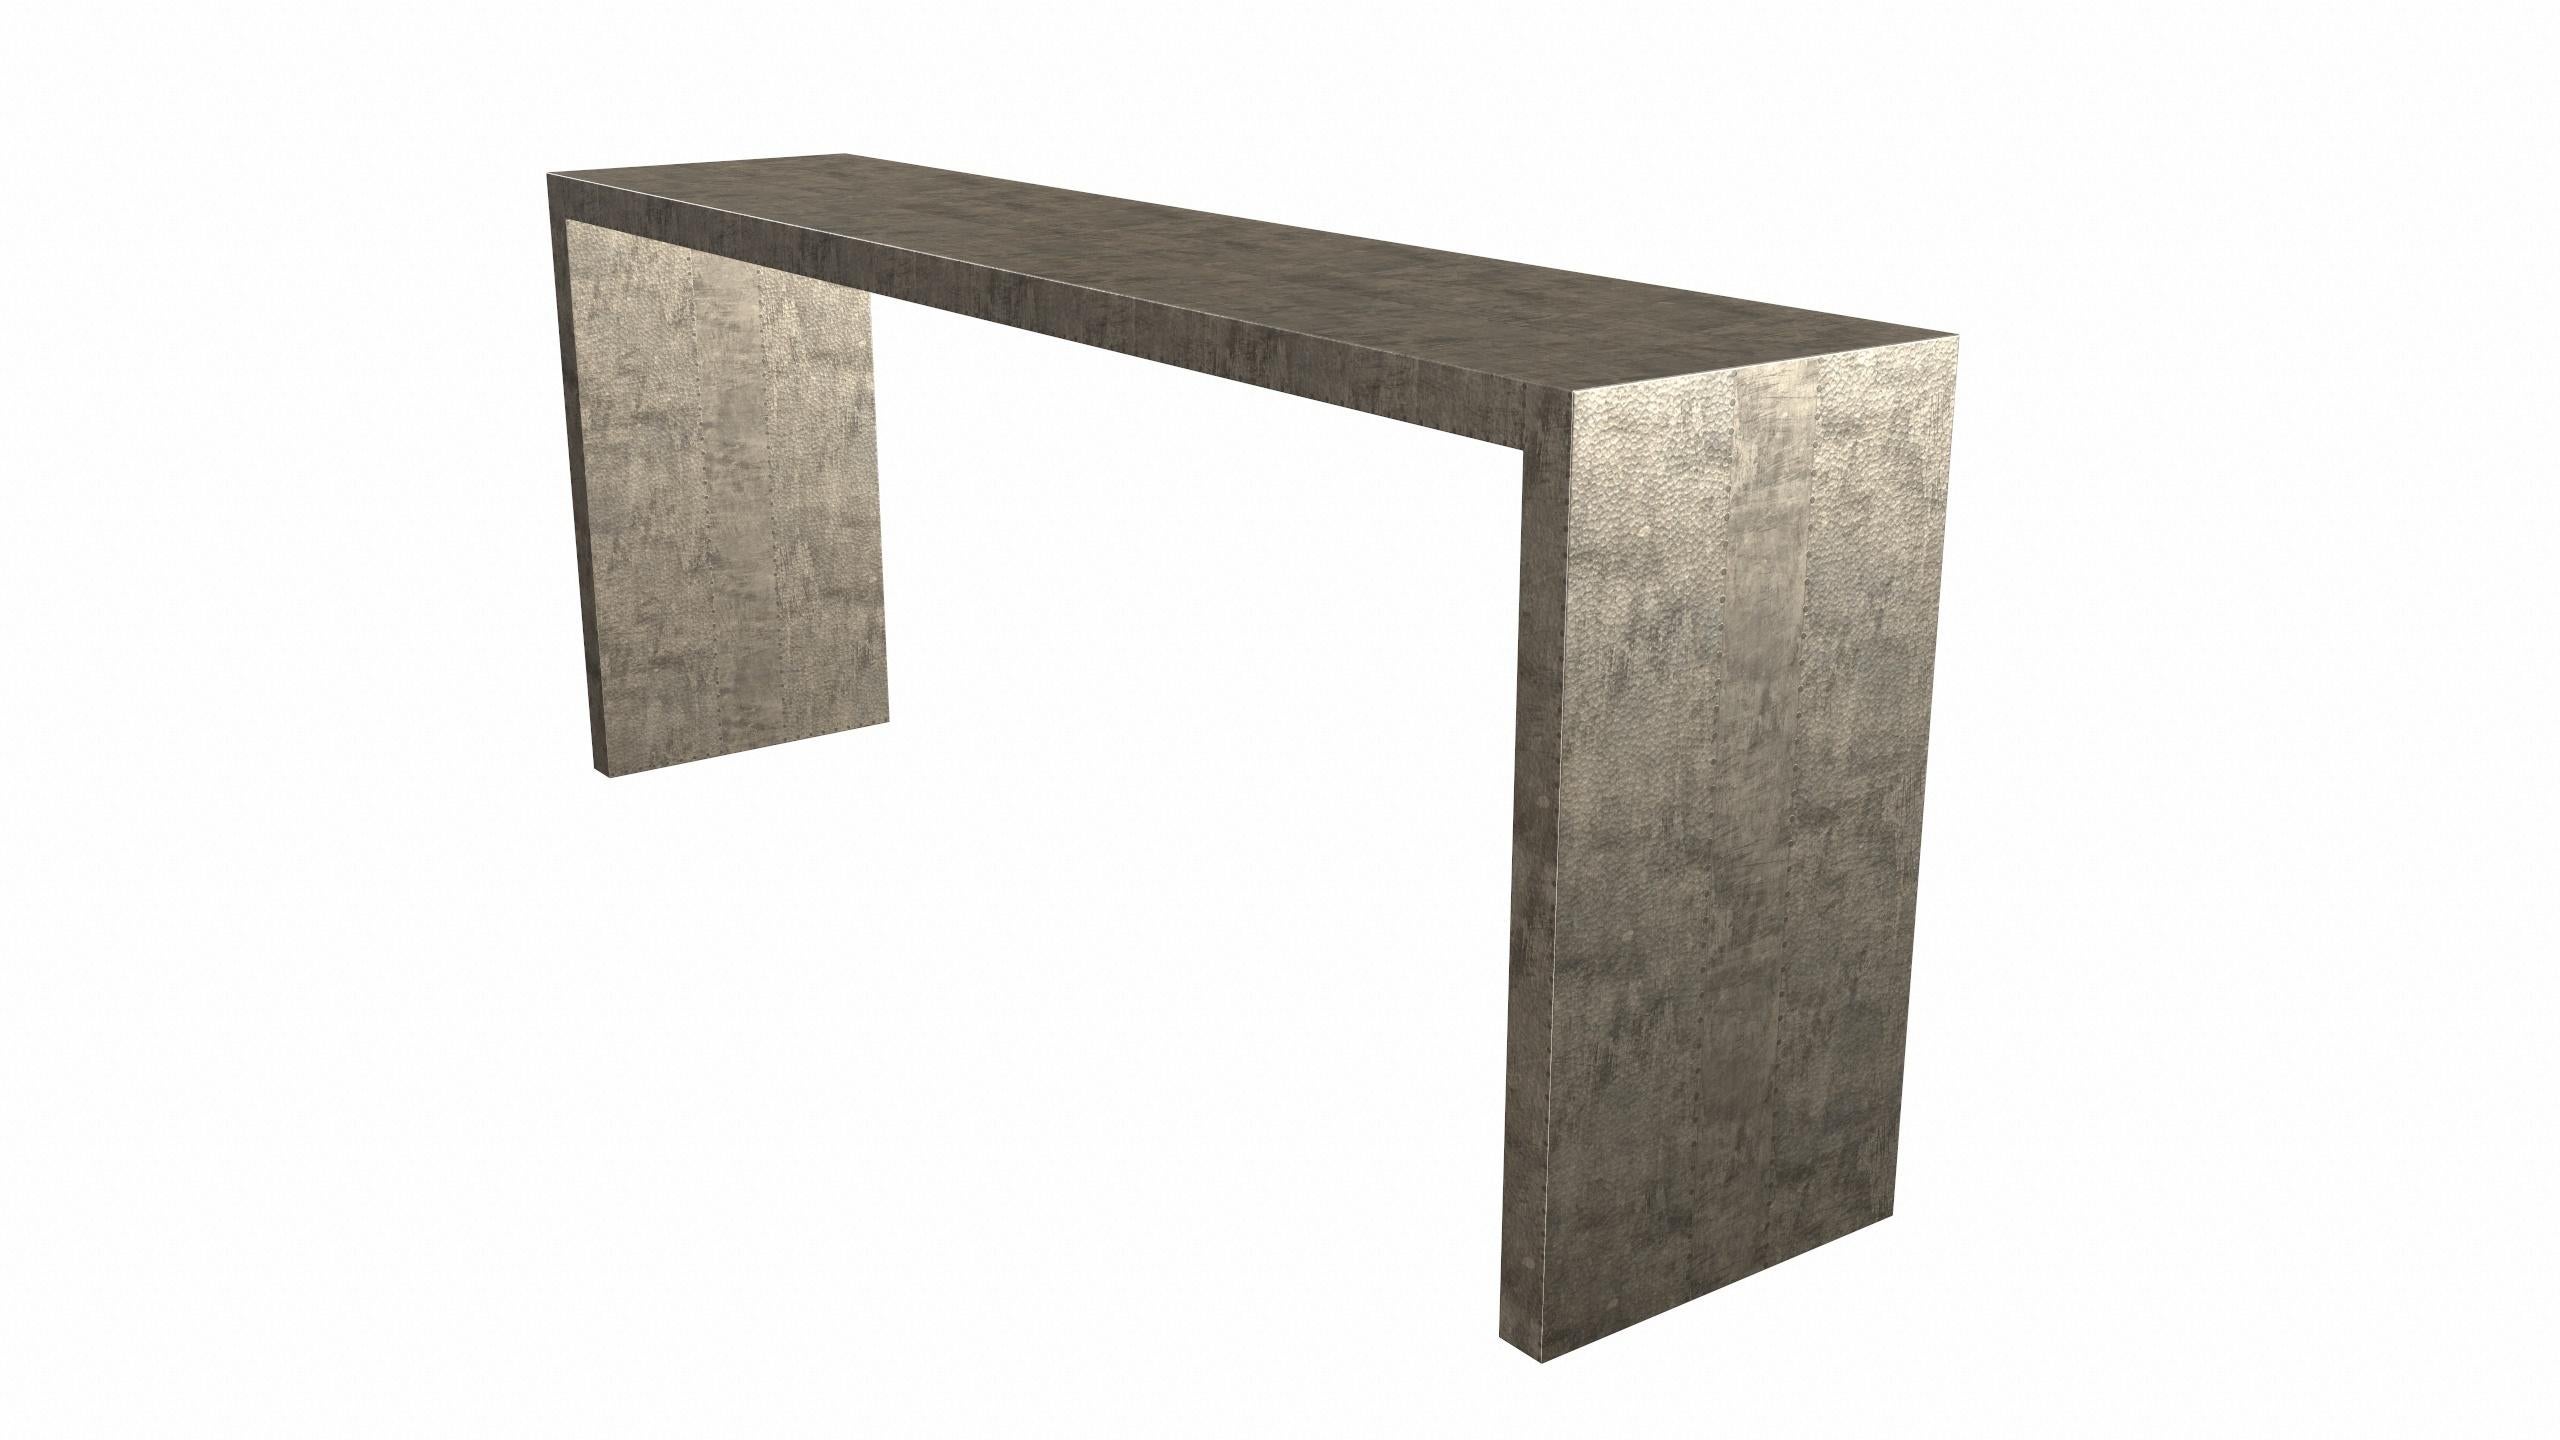 Metal Art Deco Rectangular Console Tables Mid. Hammered Antique Bronze by Alison Spear For Sale